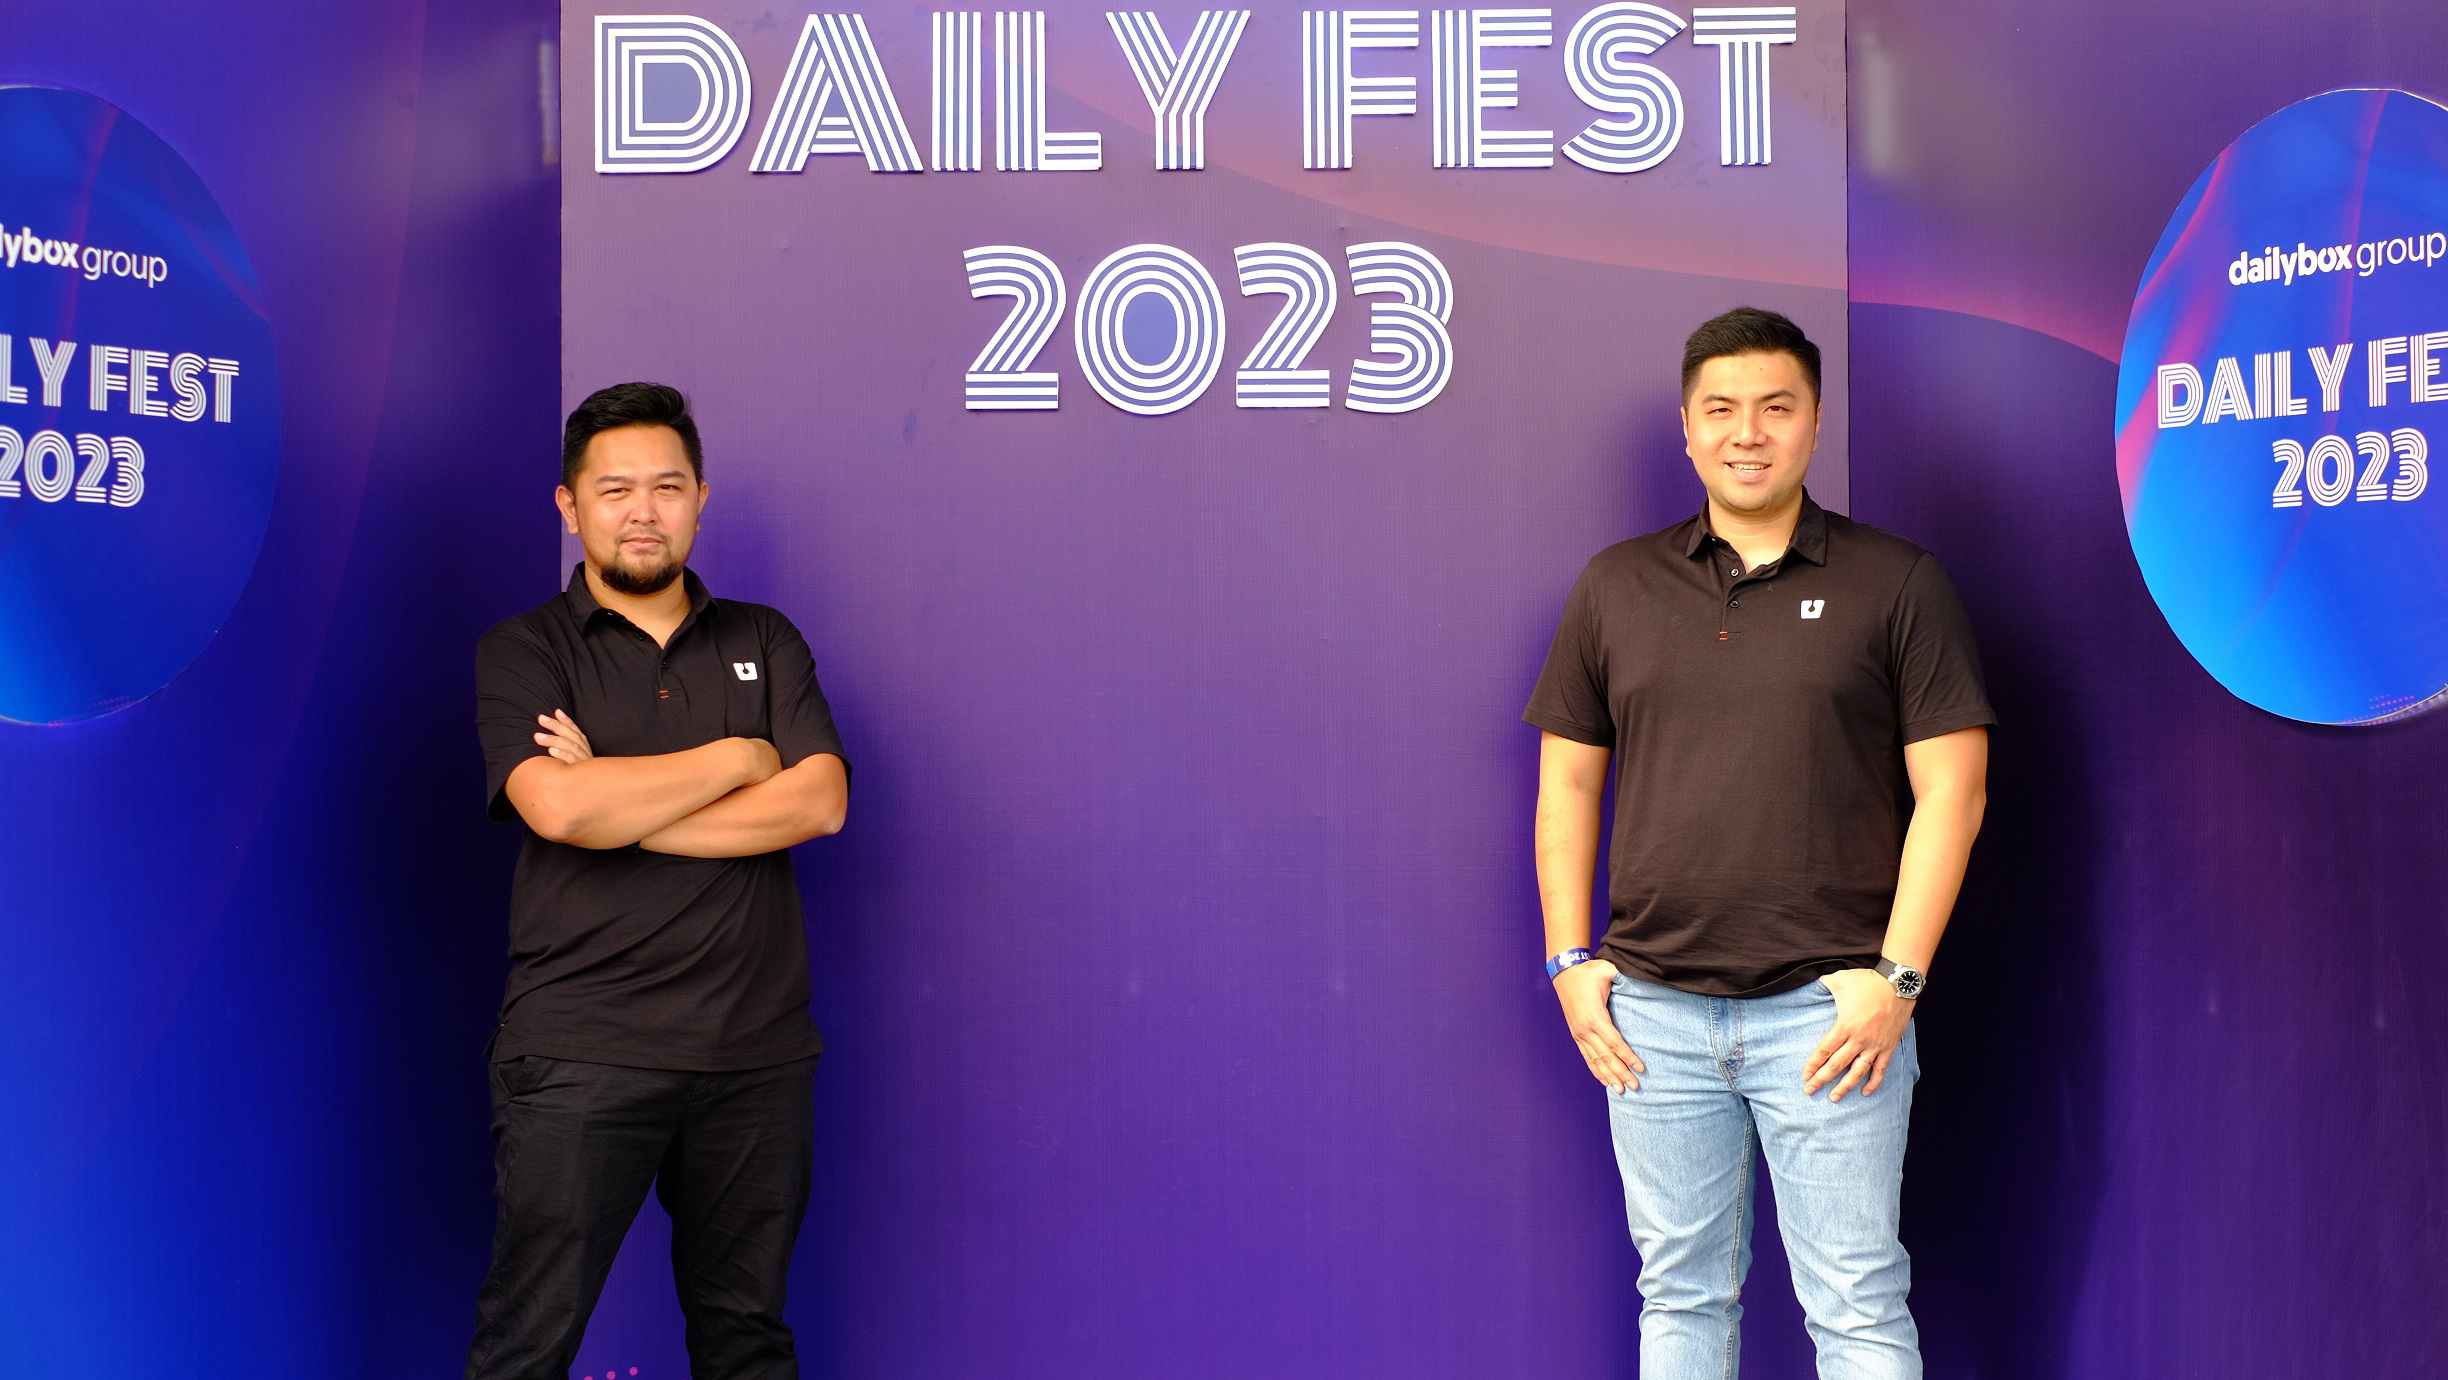 Dailybox Group